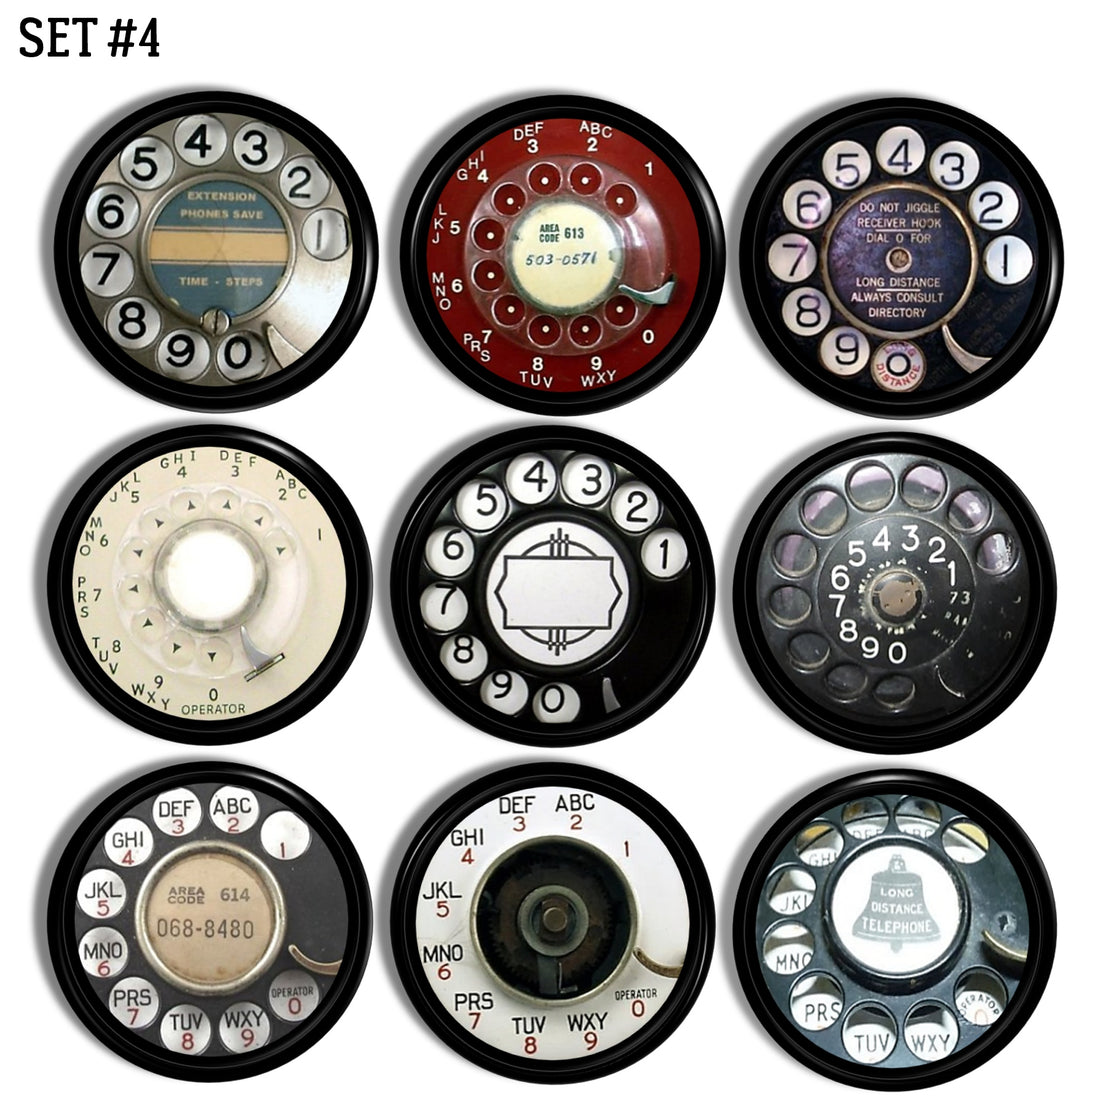 Antique telephone collectible theme cupbord handle knobs in black, red and white for steampunk or vintage industrial home style